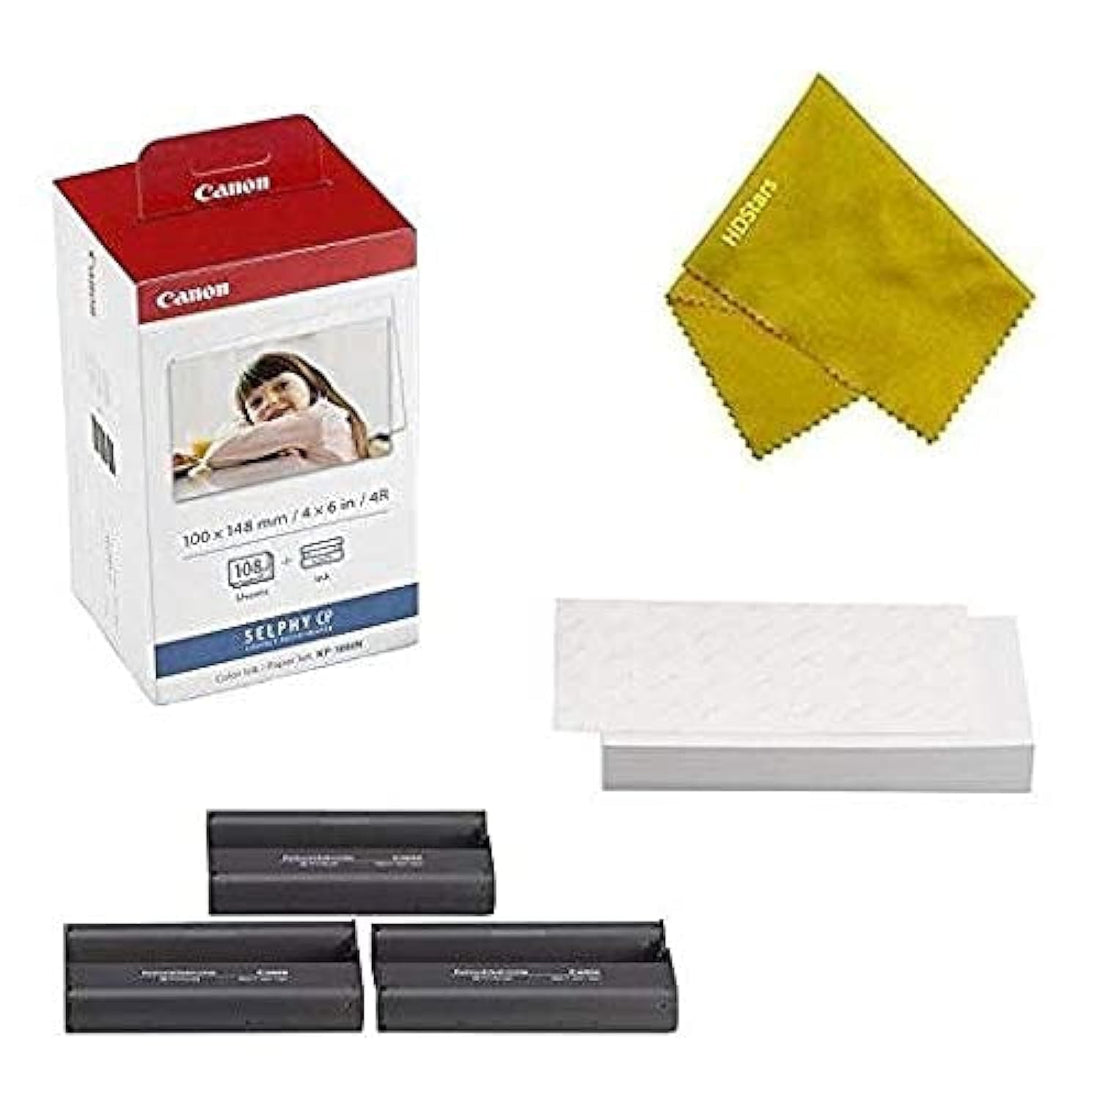 Canon KP108IN 3 Color Ink Cassette and 108 Sheets 4 x 6 Paper Glossy for SELPHY CP1300, CP1200, CP910, CP900, CP760, CP770, CP780 CP800 Wireless Compact Photo Printer